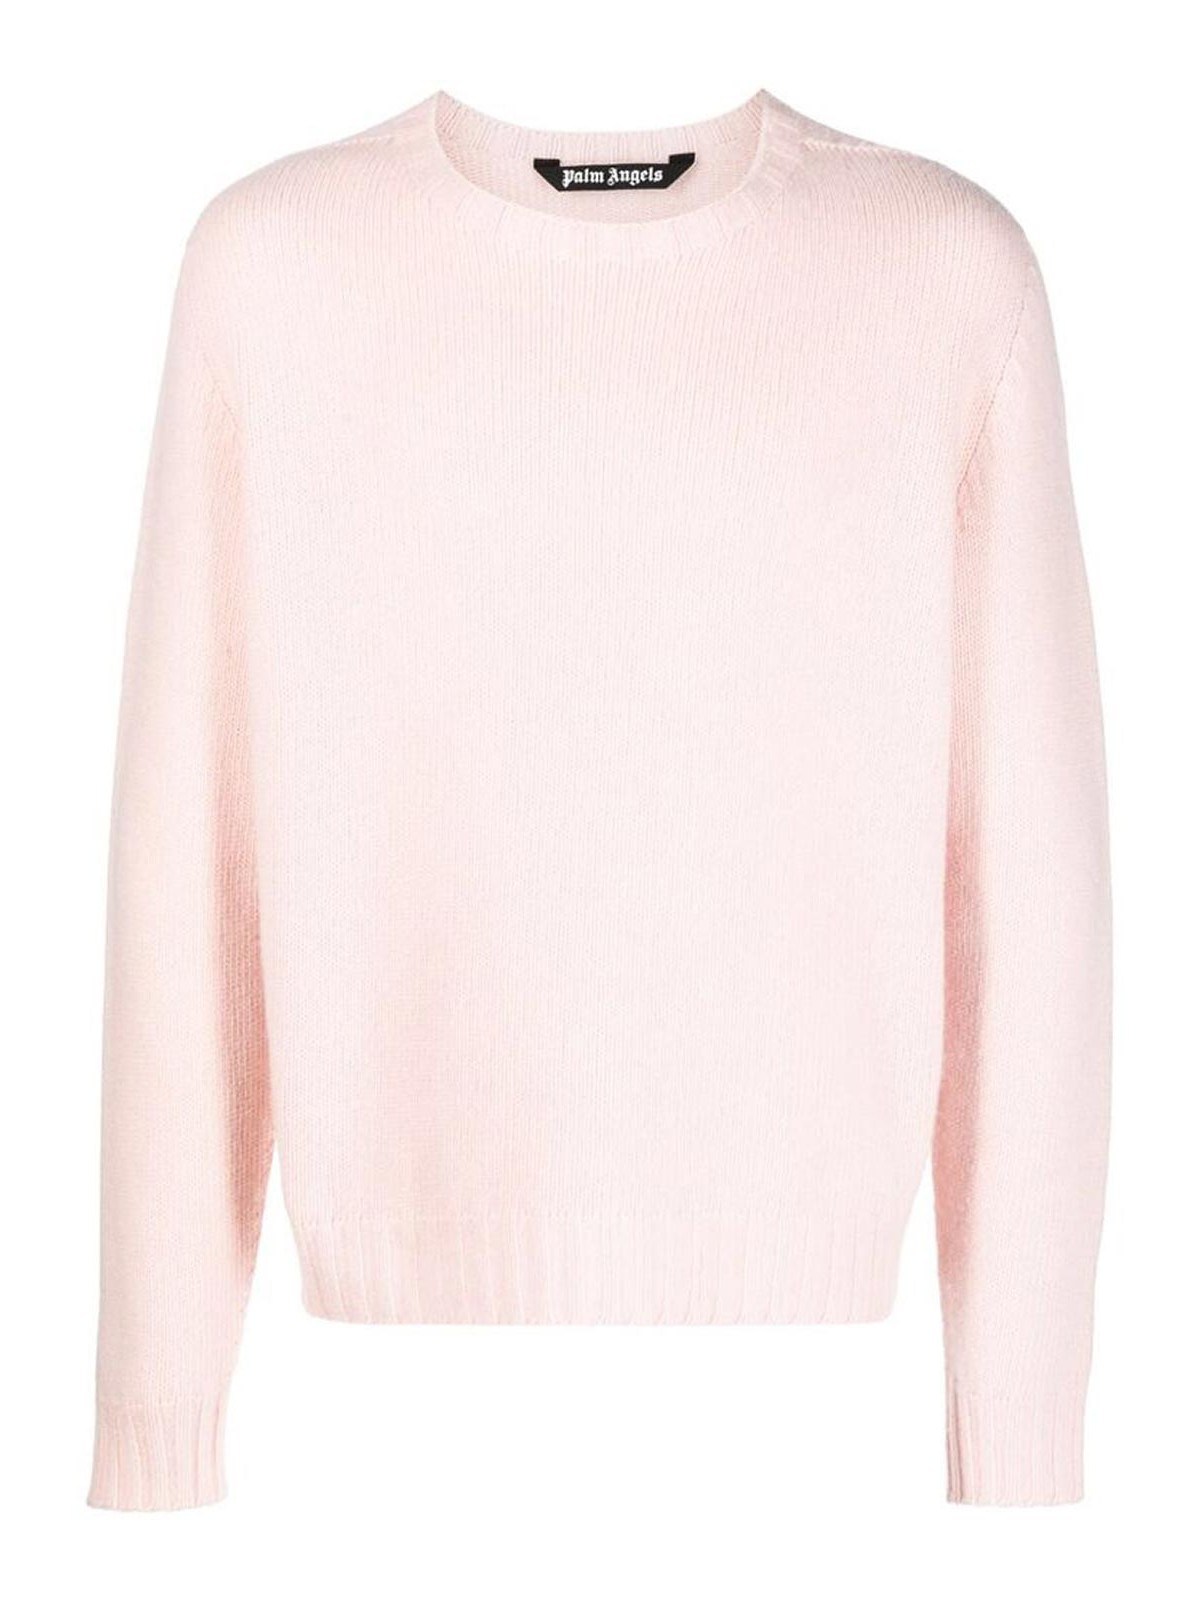 Shop Palm Angels Knit Sweater In Nude & Neutrals